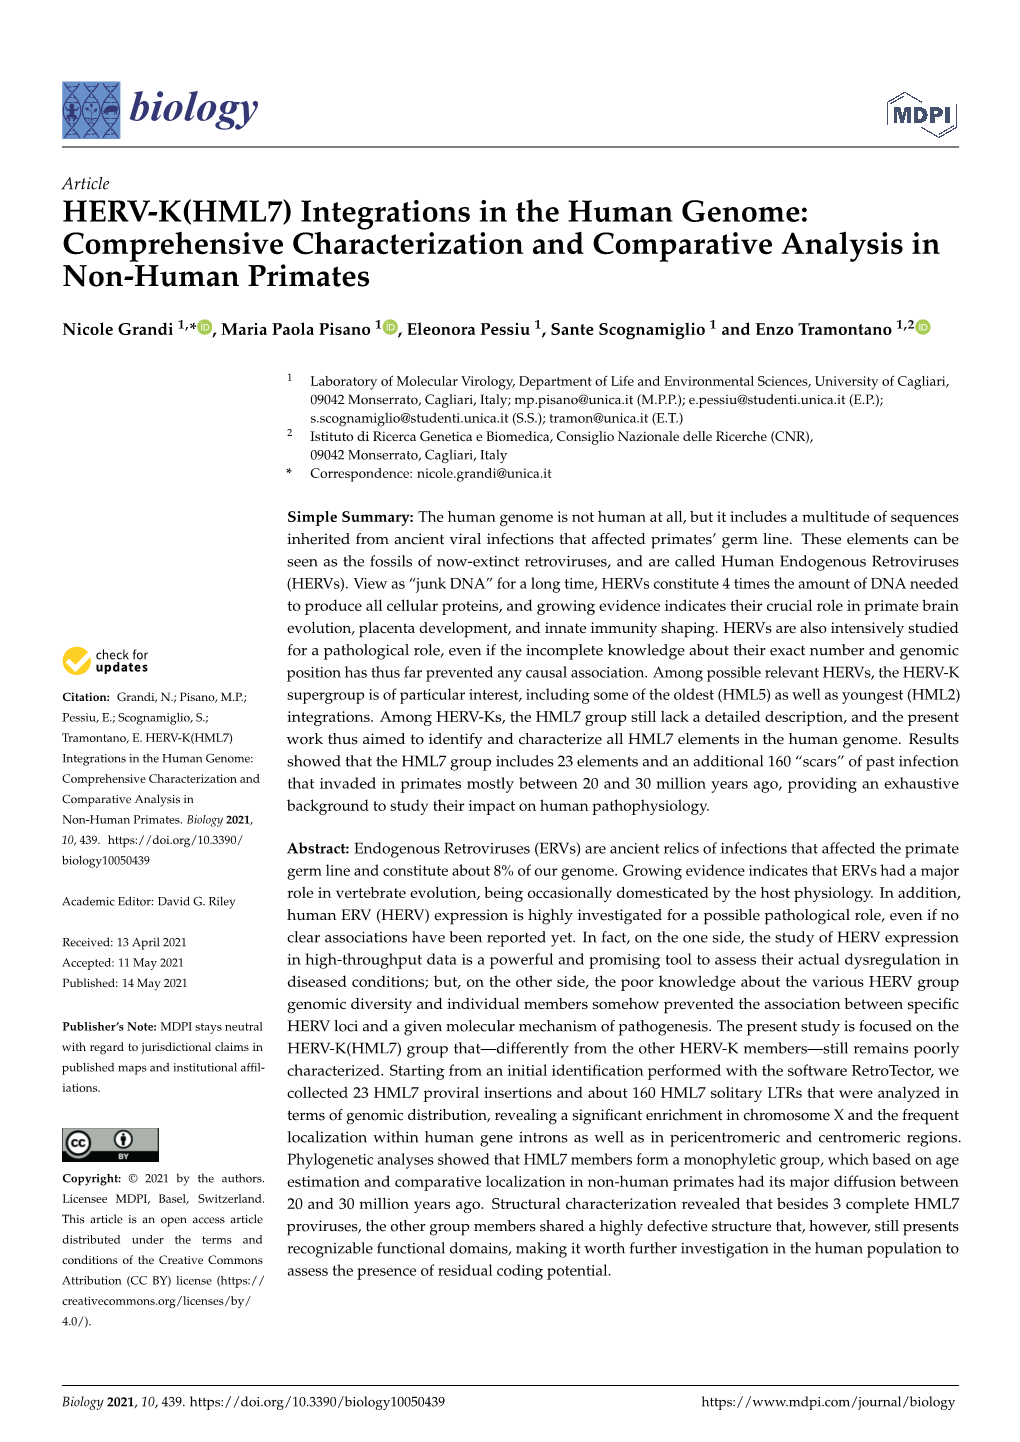 HERV-K(HML7) Integrations in the Human Genome: Comprehensive Characterization and Comparative Analysis in Non-Human Primates